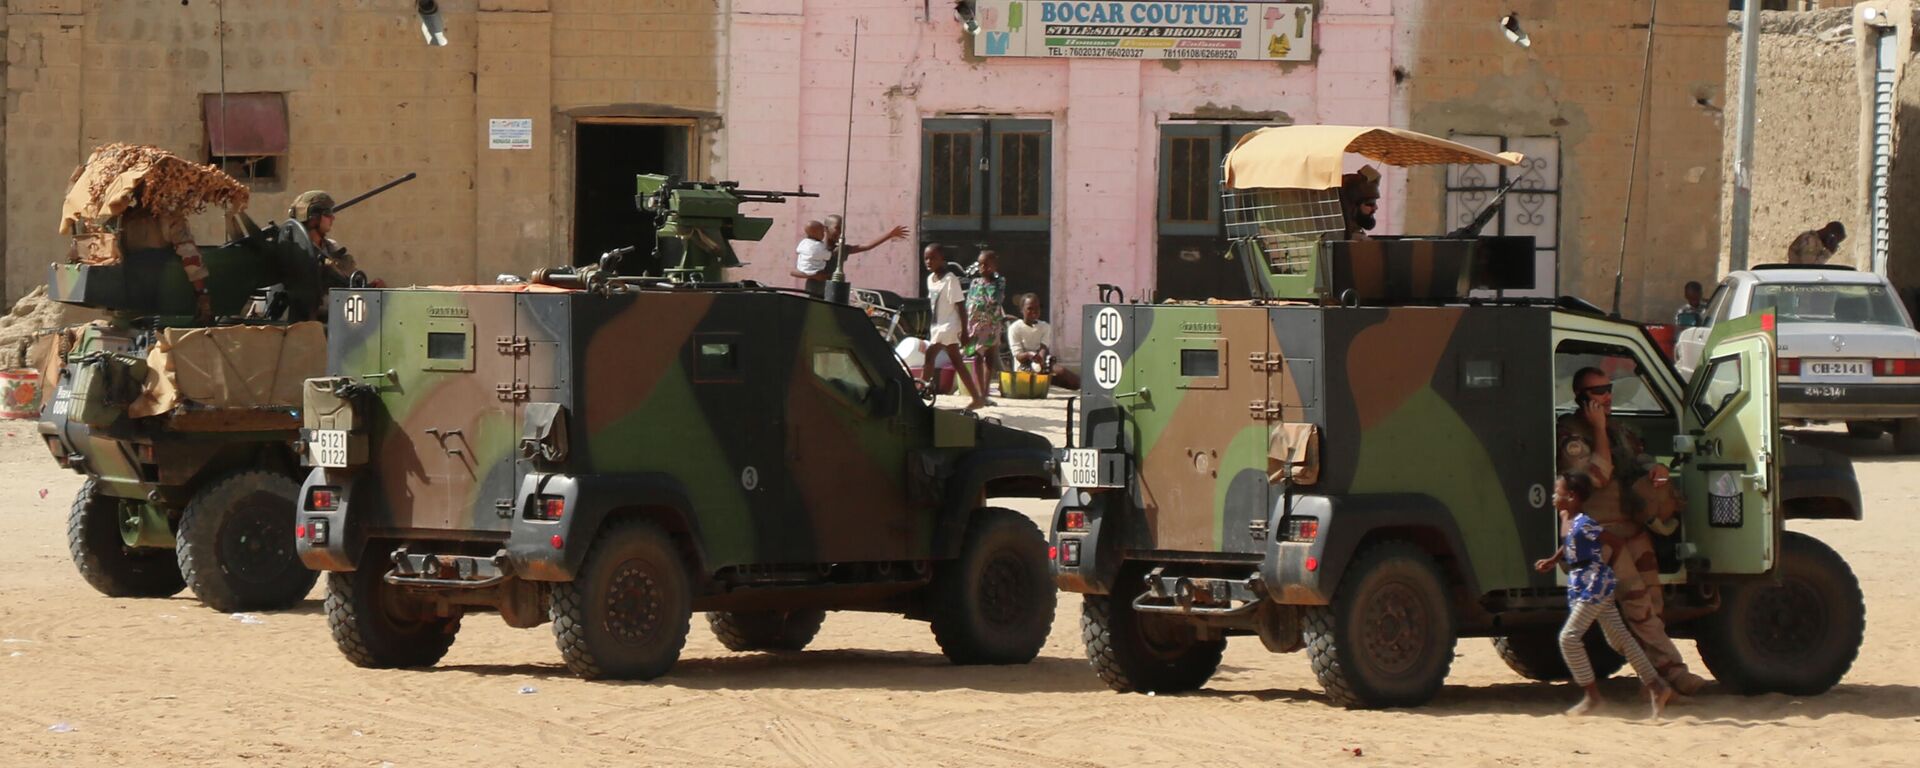 French Barkhane forces patrol the streets of Timbuktu, Mali, Wednesday Sept. 29, 2021. Many residents of Timbuktu are worried that when French troops pull out of the city in northern Mali, jihadis will return to impose strict Shariah law including public whippings and amputations. The Islamic extremists ruled Timbuktu in 2012 and banned music, sports and destroyed historic mausoleums, saying they were idolatrous. - Sputnik International, 1920, 19.11.2021